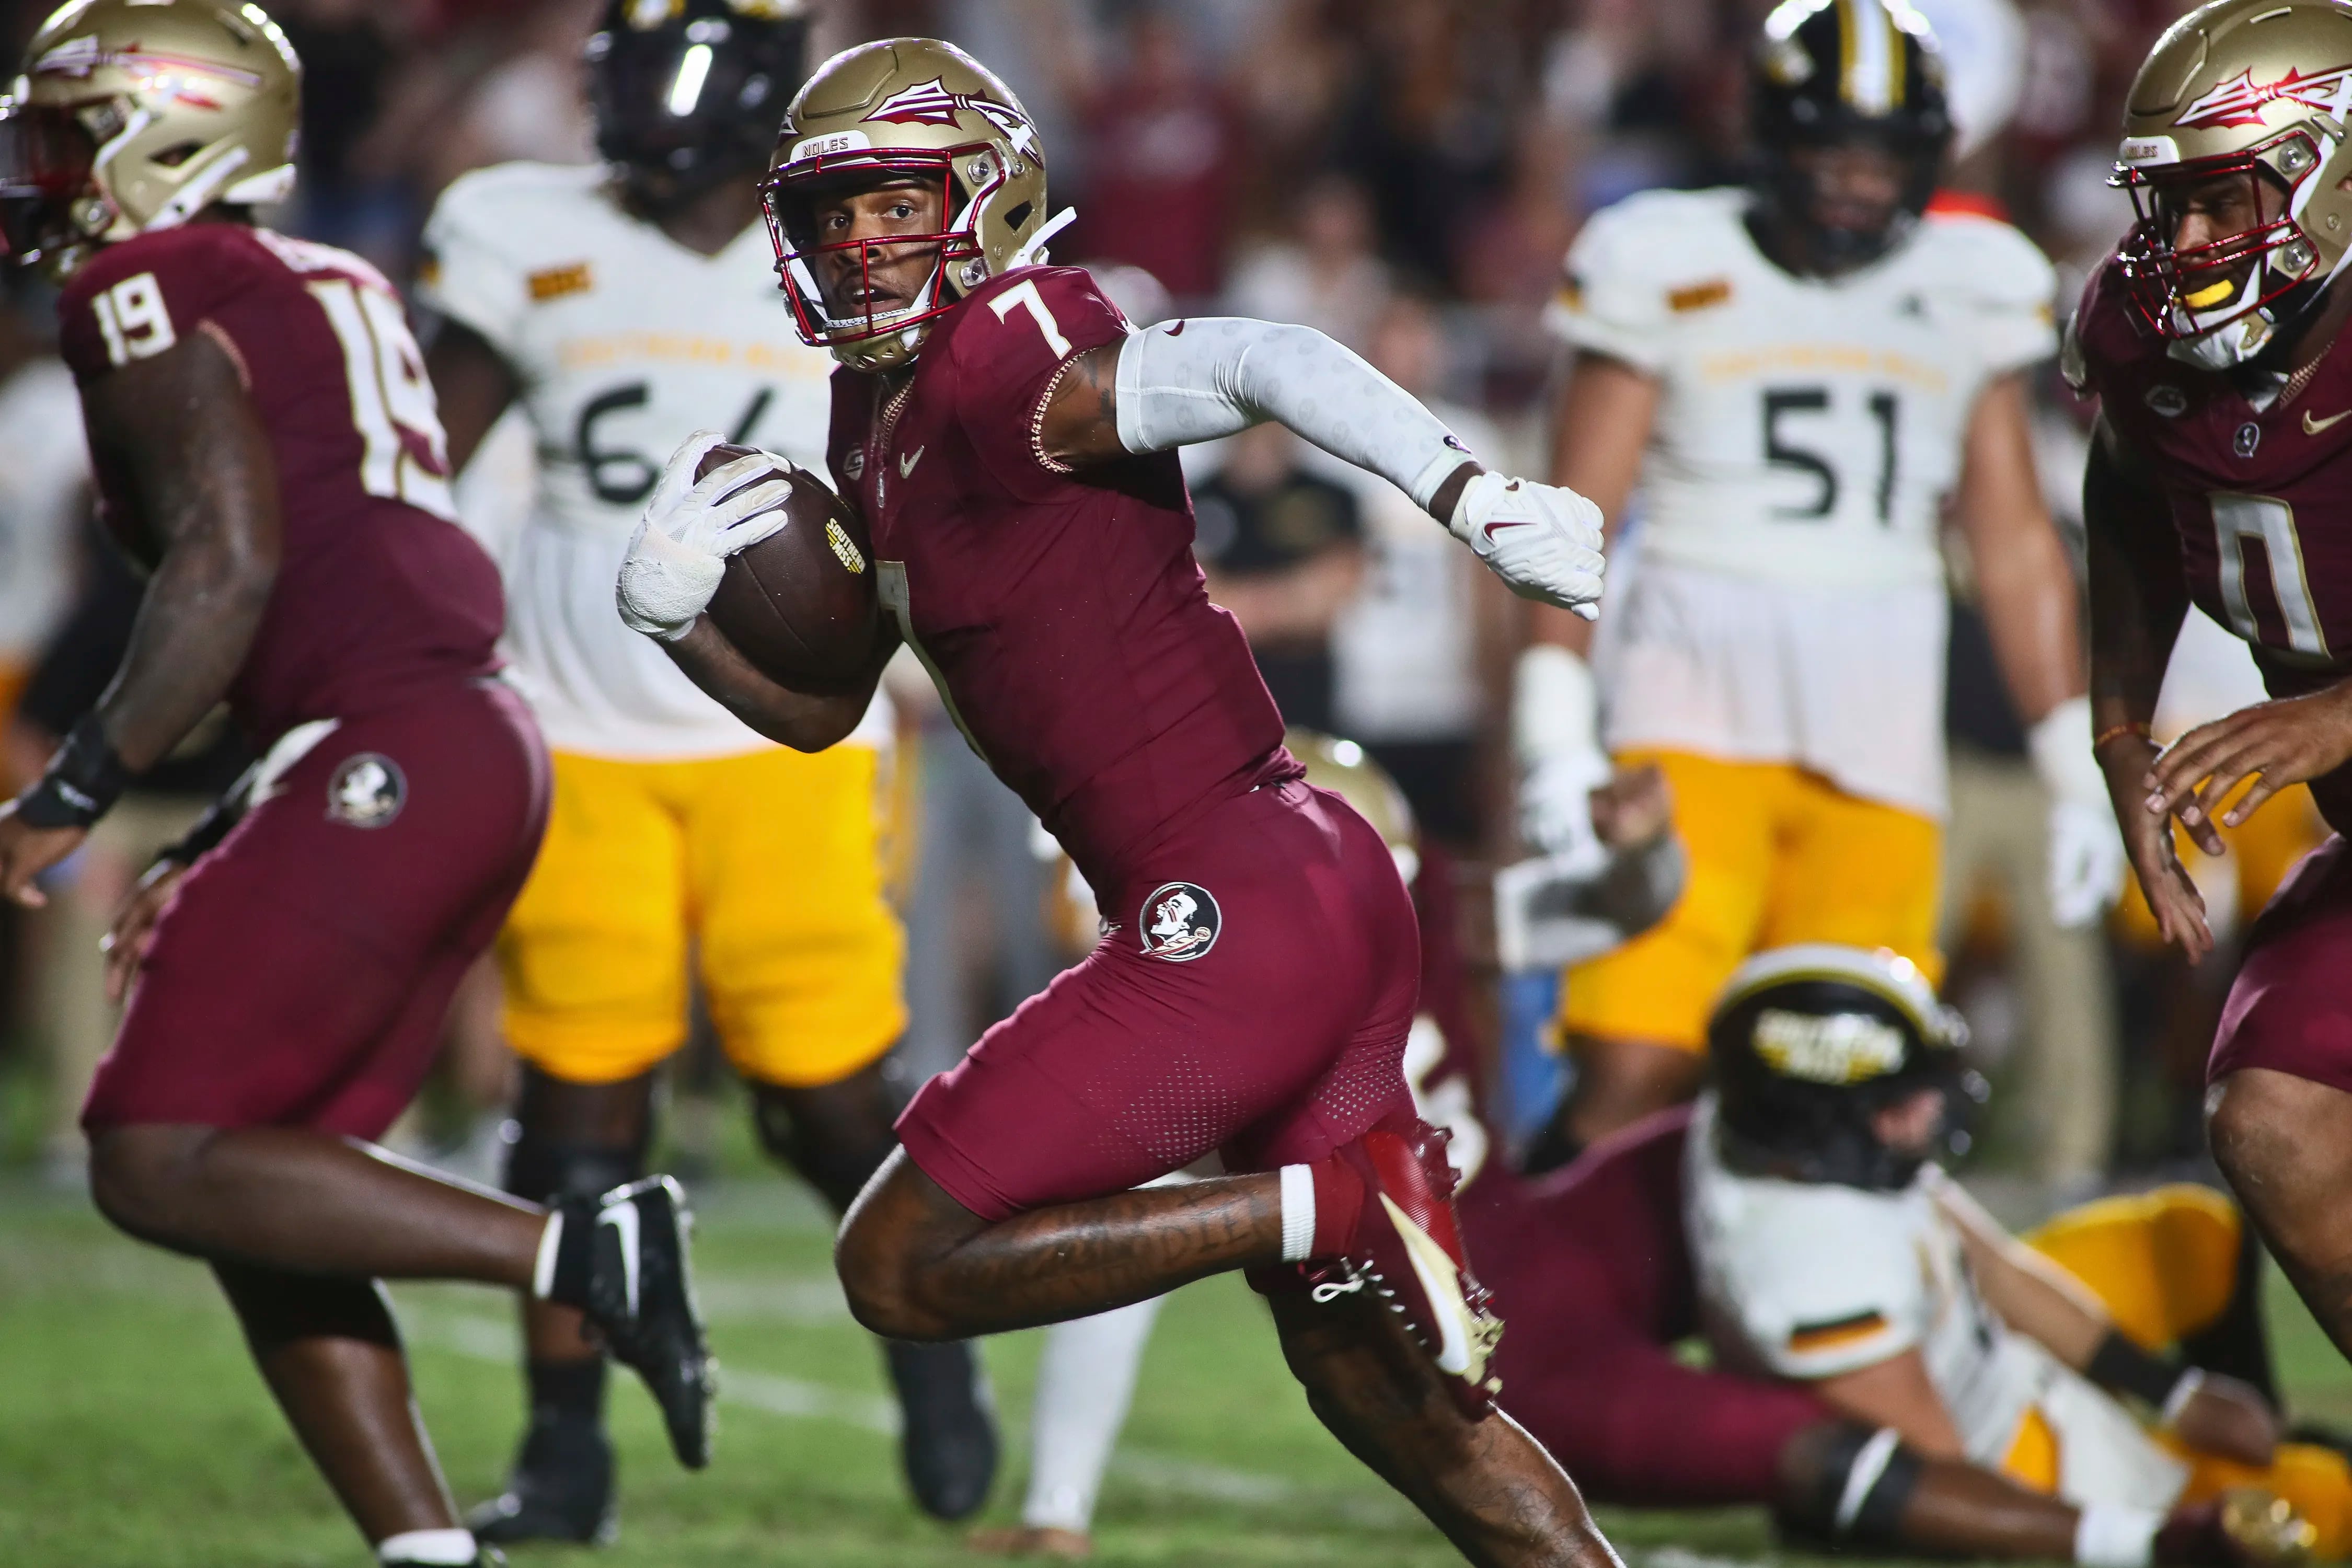 Florida State defensive back Jarrian Jones (7) returns an interception for a touchdown in the third quarter of an NCAA college football game against Southern Mississippi, Saturday, Sept. 9, 2023, in Tallahassee, Fla. FSU won 66-13. (AP Photo/Phil Sears)